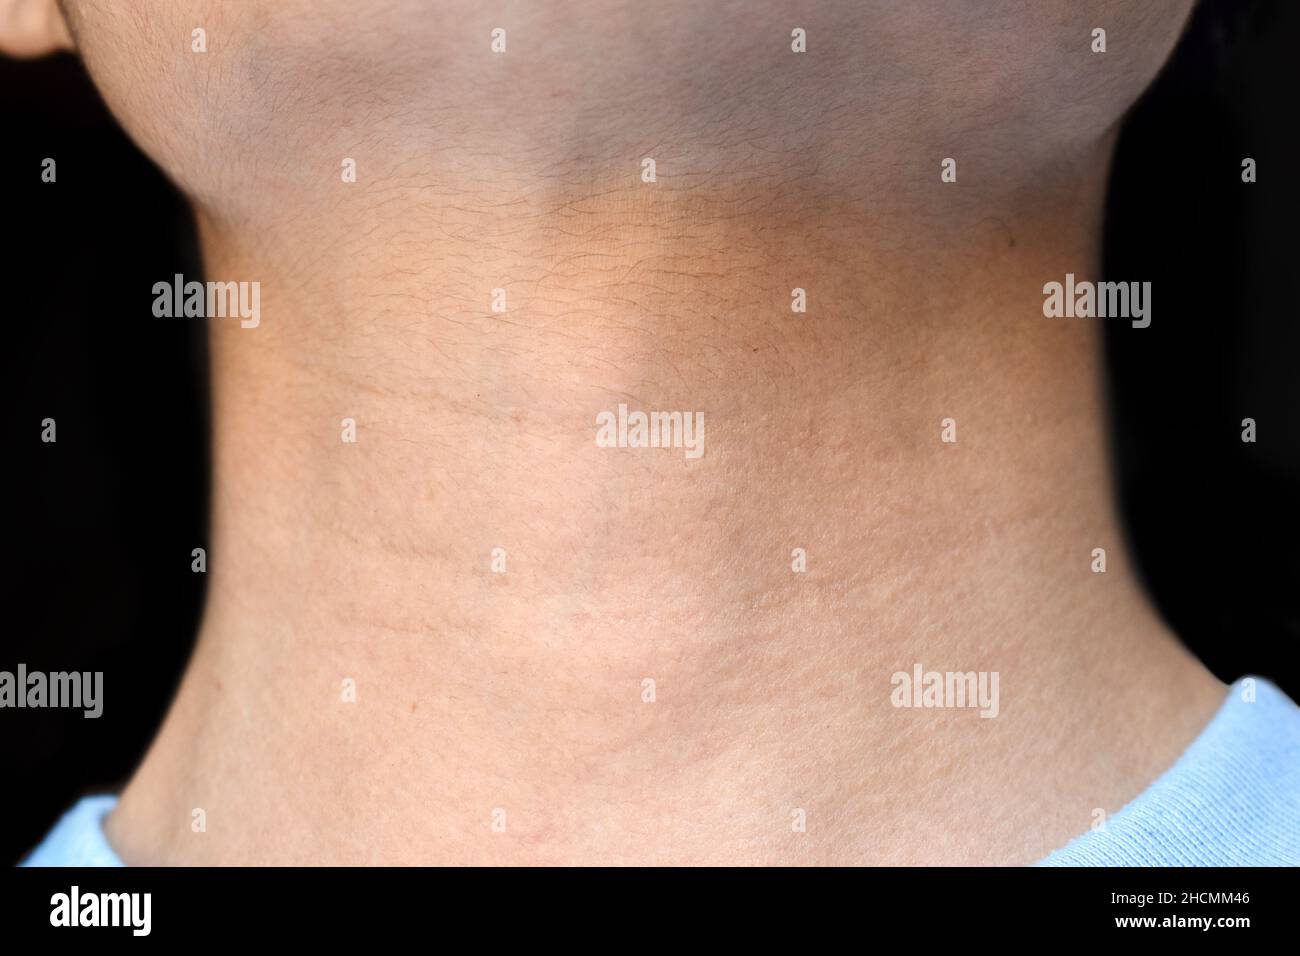 Aging skin folds or skin creases or wrinkles at neck of Southeast Asian, Chinese young man. Left lateral view. Stock Photo